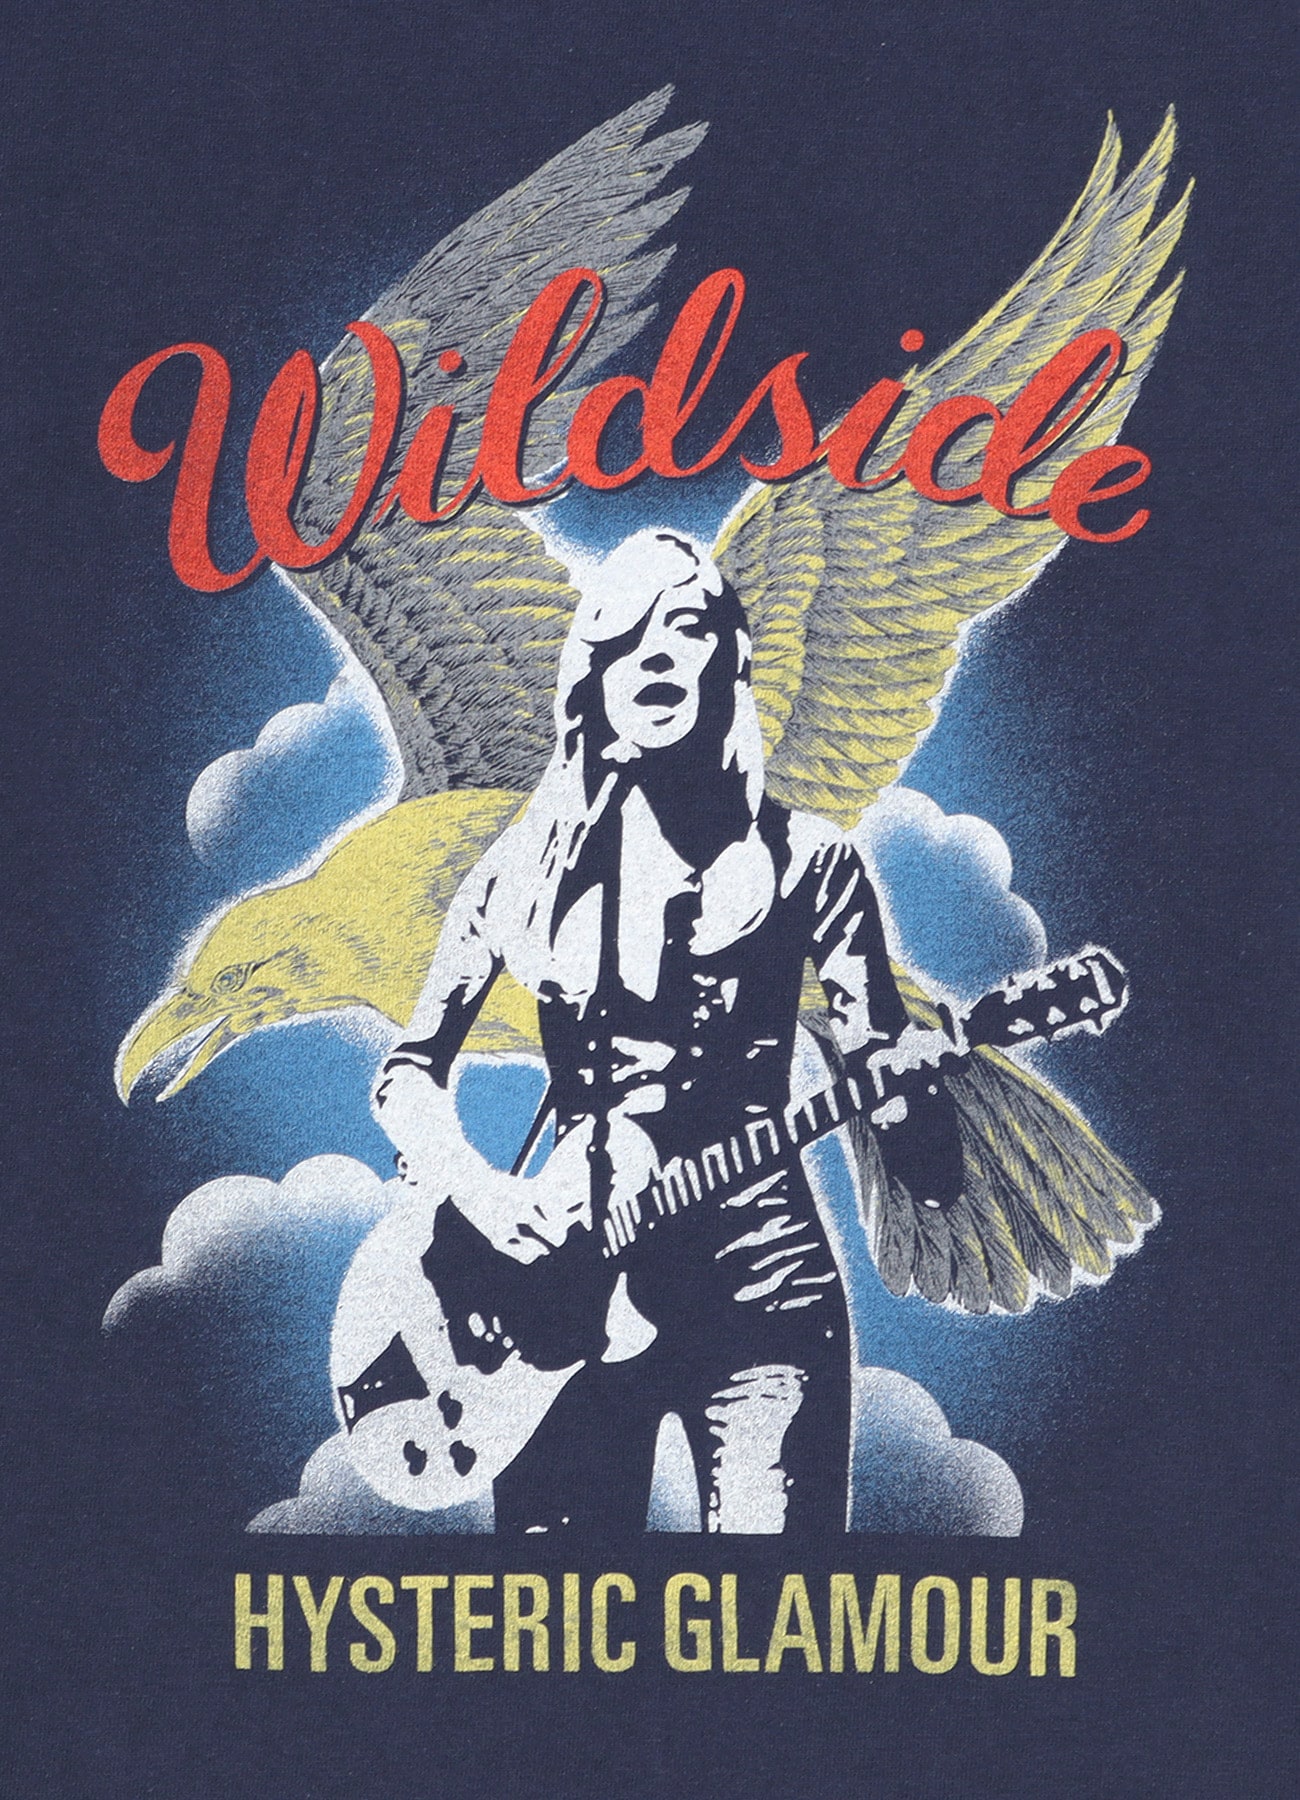 WILDSIDE × HYSTERIC GLAMOUR T-Shirt